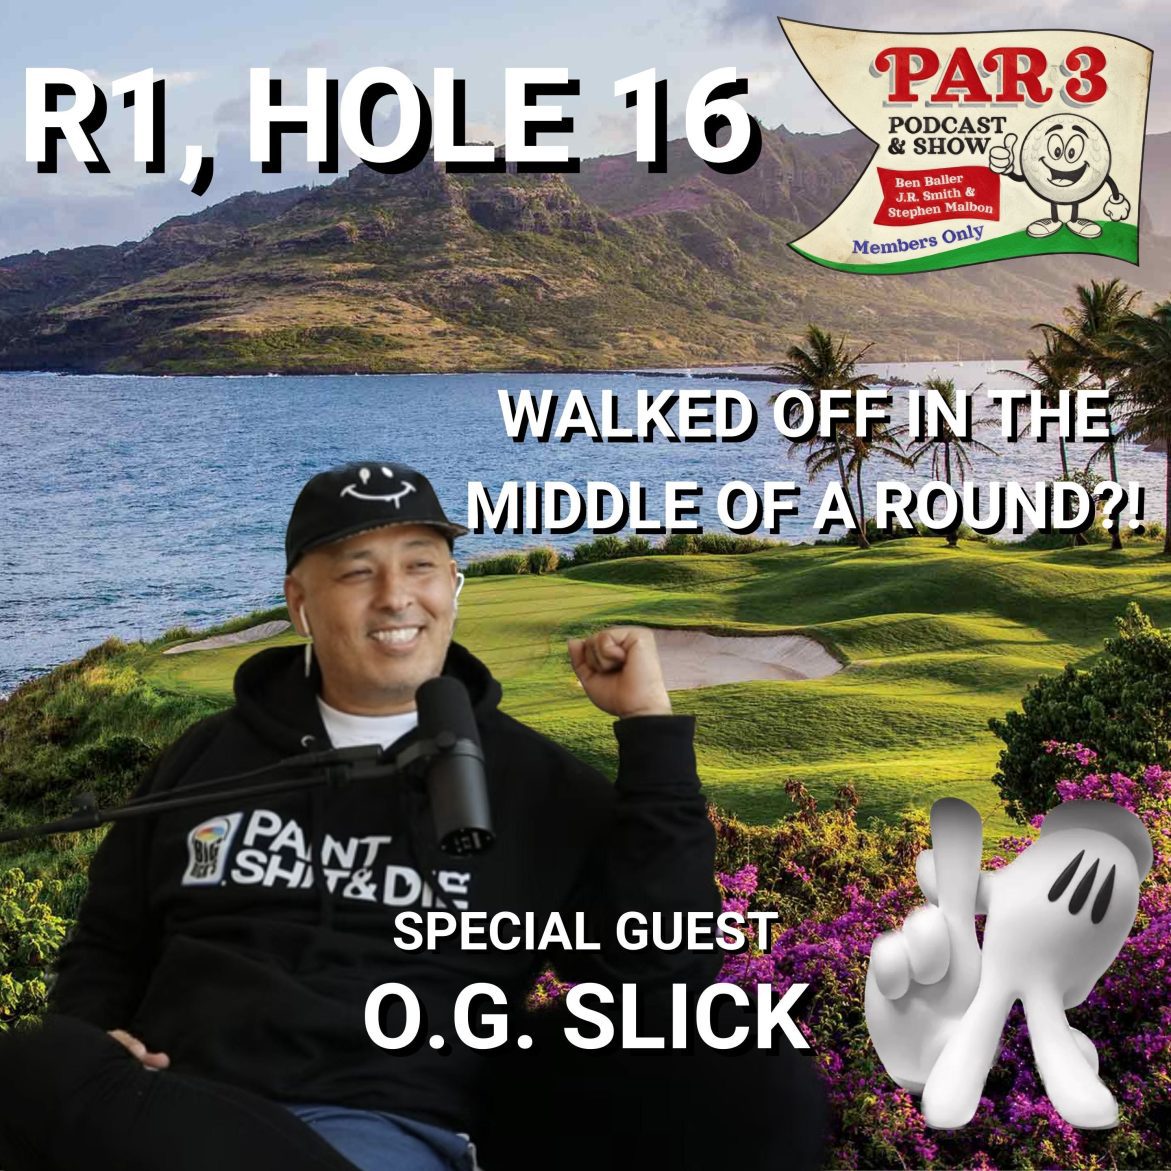 Black Podcasting - R1, HOLE 16: O.G. Slick (Graffiti Artist/Avid Golfer) & Becoming An Elite Golf Gambler, Playing Every Hawaii Course, J.R. Hits 3 Houses In Denver